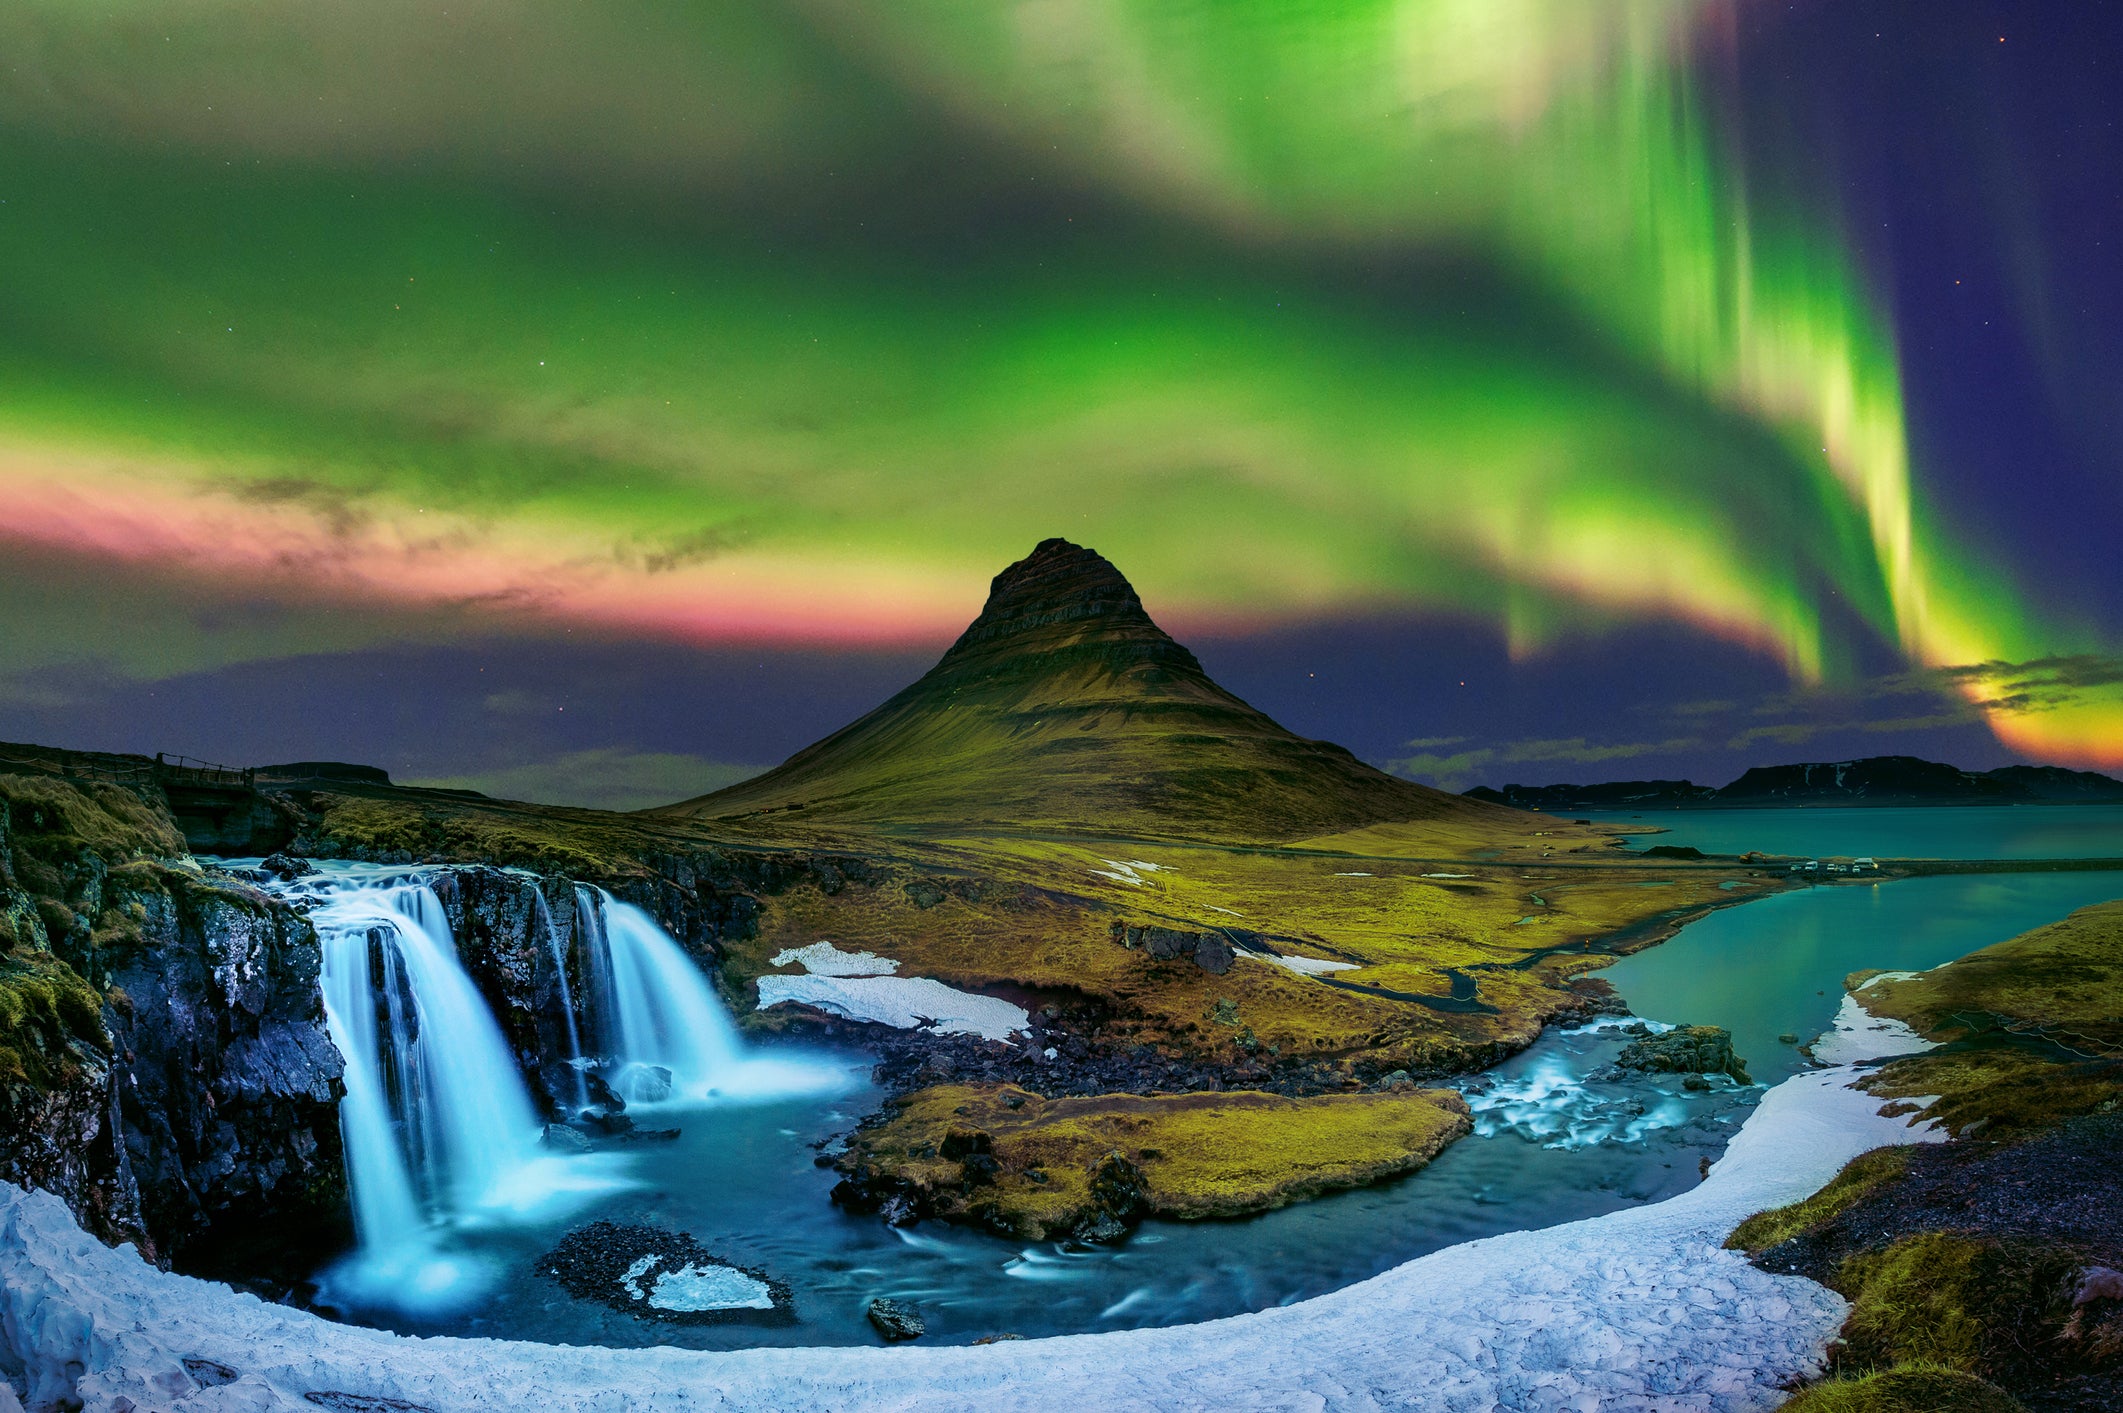 At Reykjavik’s Northern Lights Center, you’ll learn the science behind the spectacle